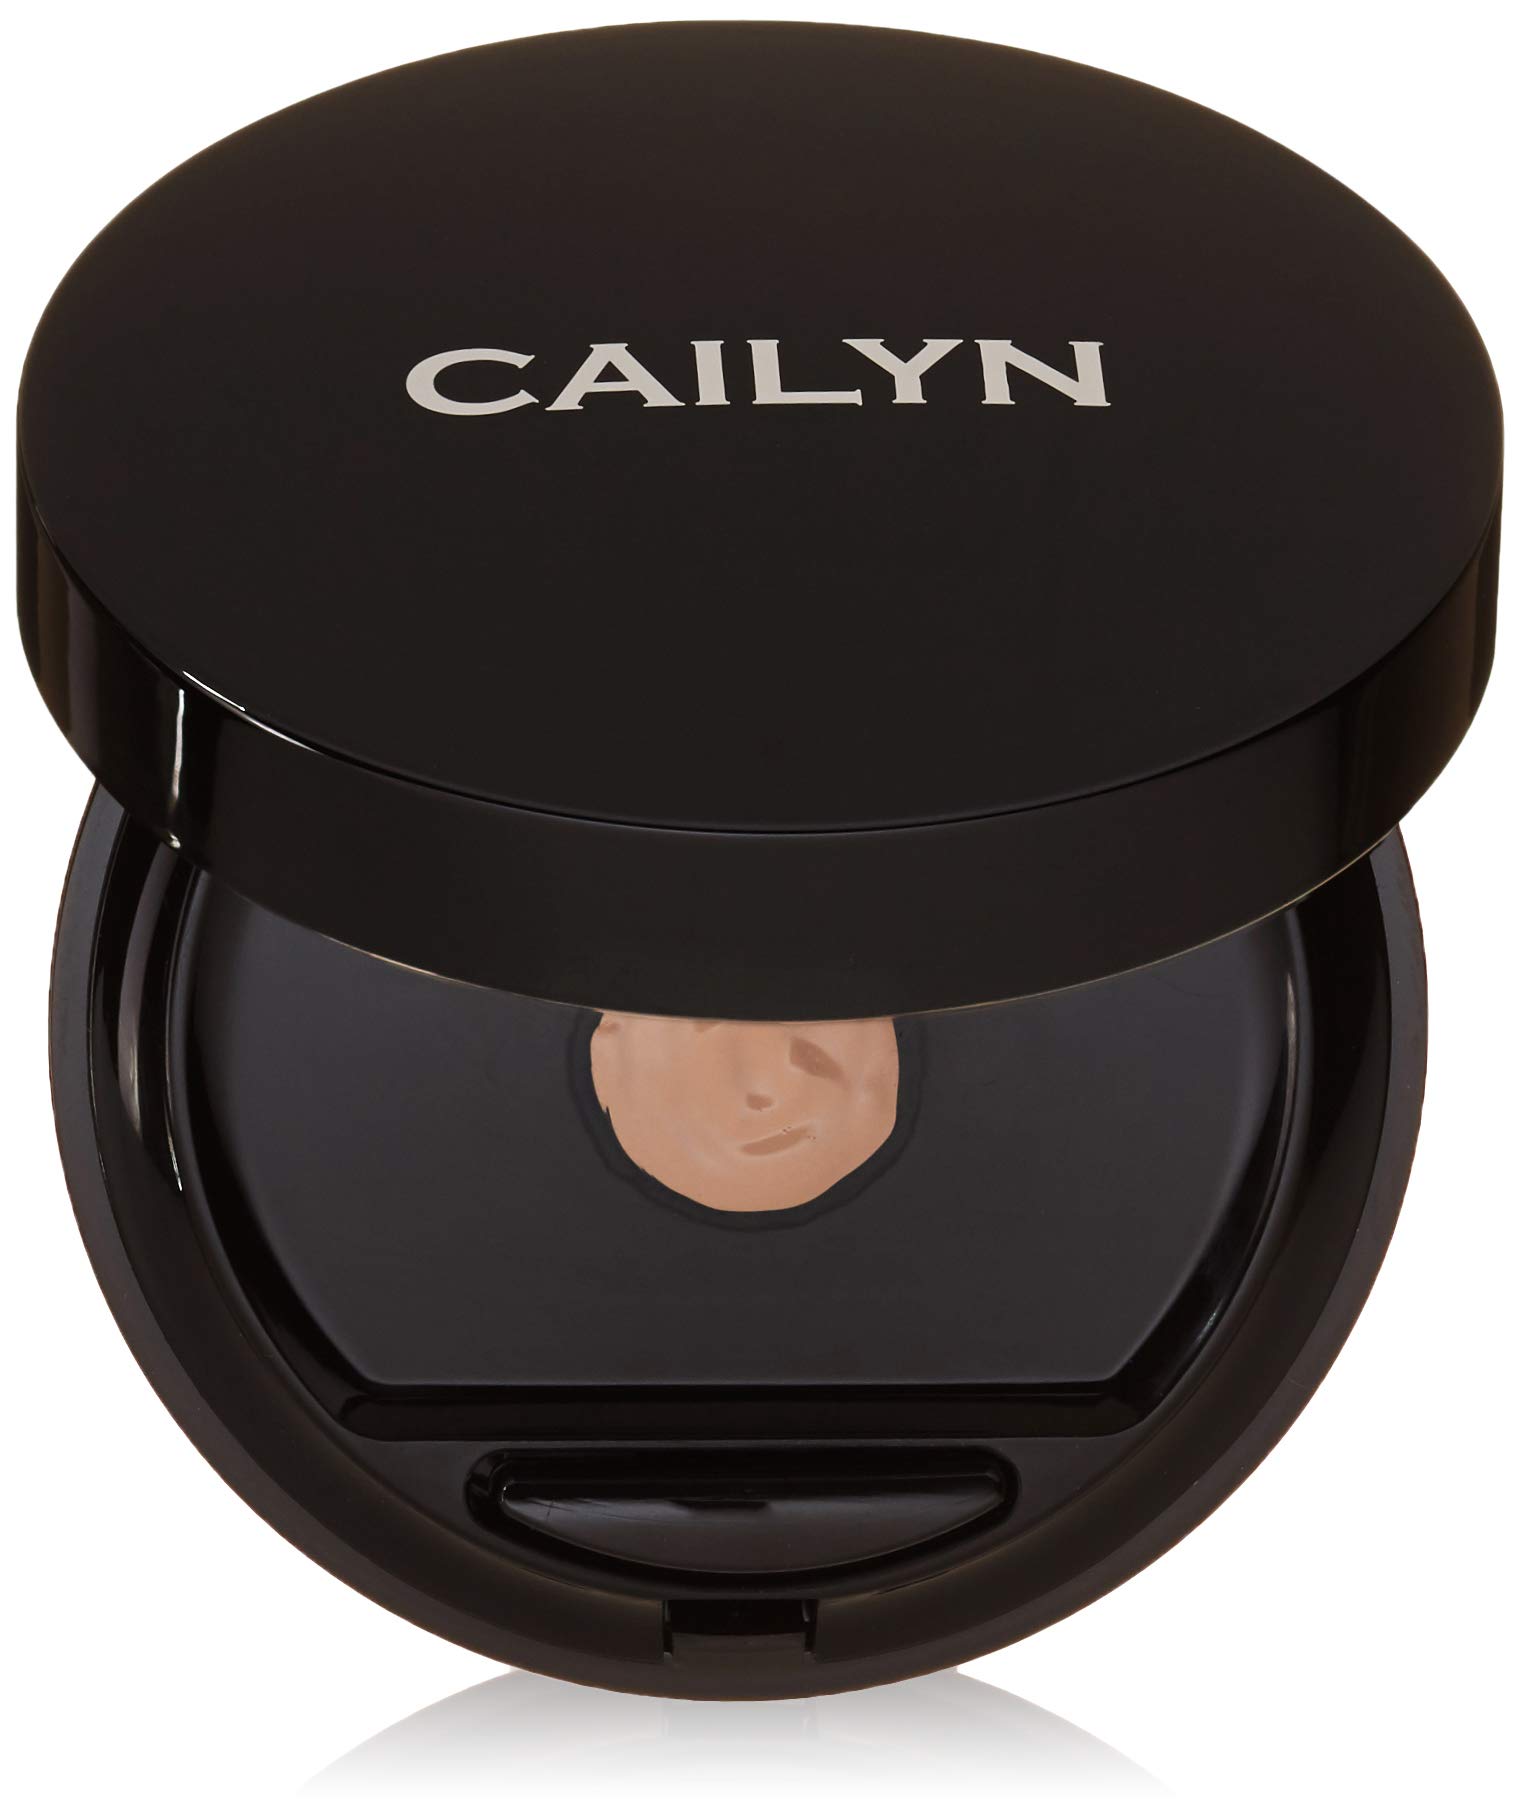 CAILYN BB Fluid Touch Compact, Sandstone, 1 Count (Pack of 1)